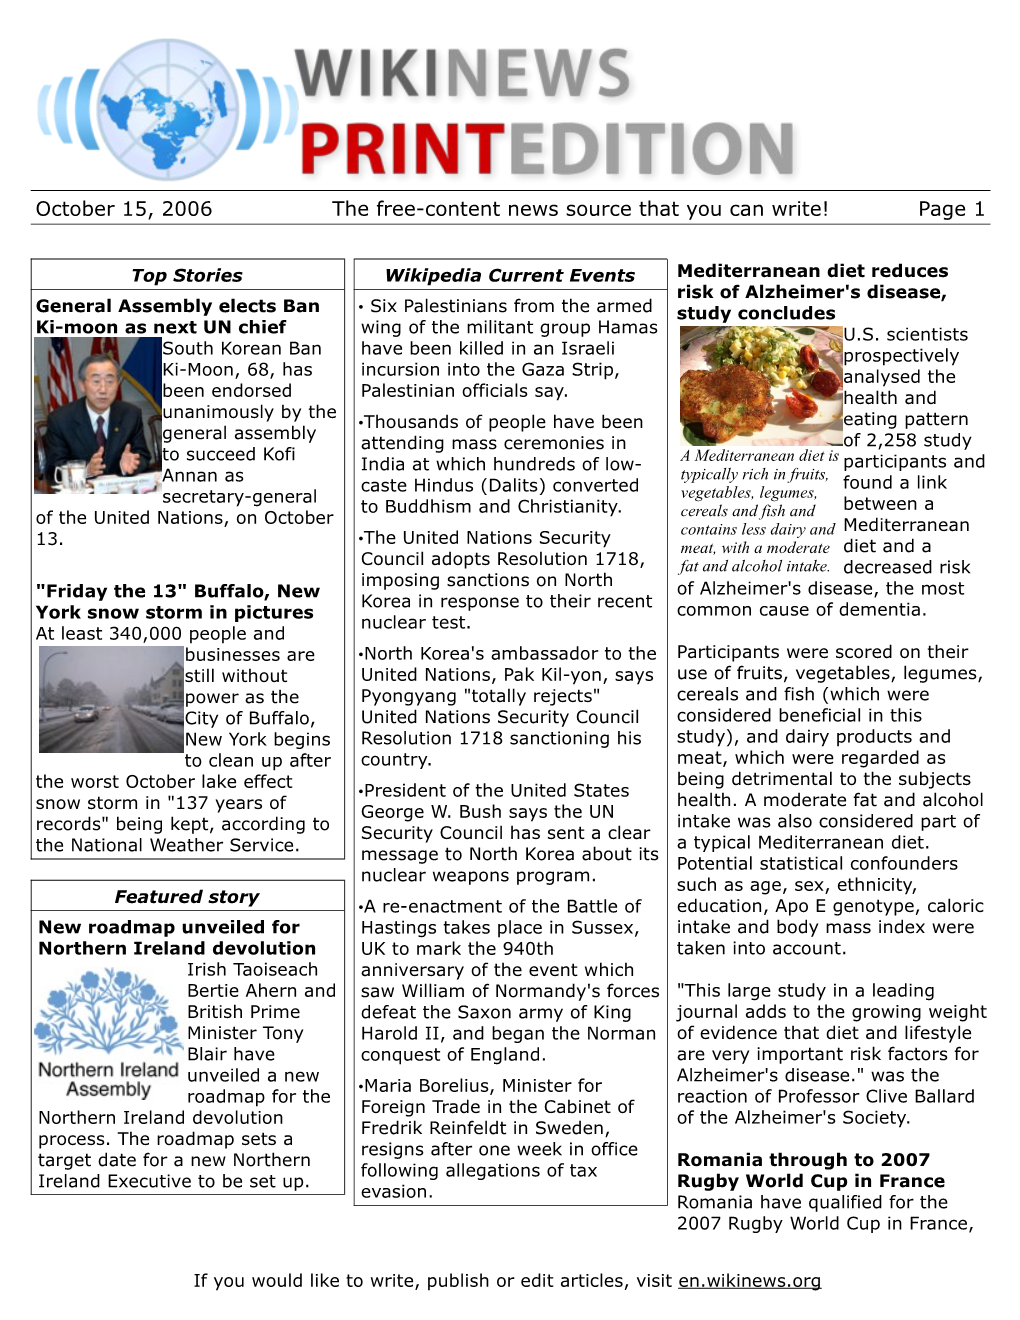 October 15, 2006 the Free-Content News Source That You Can Write! Page 1